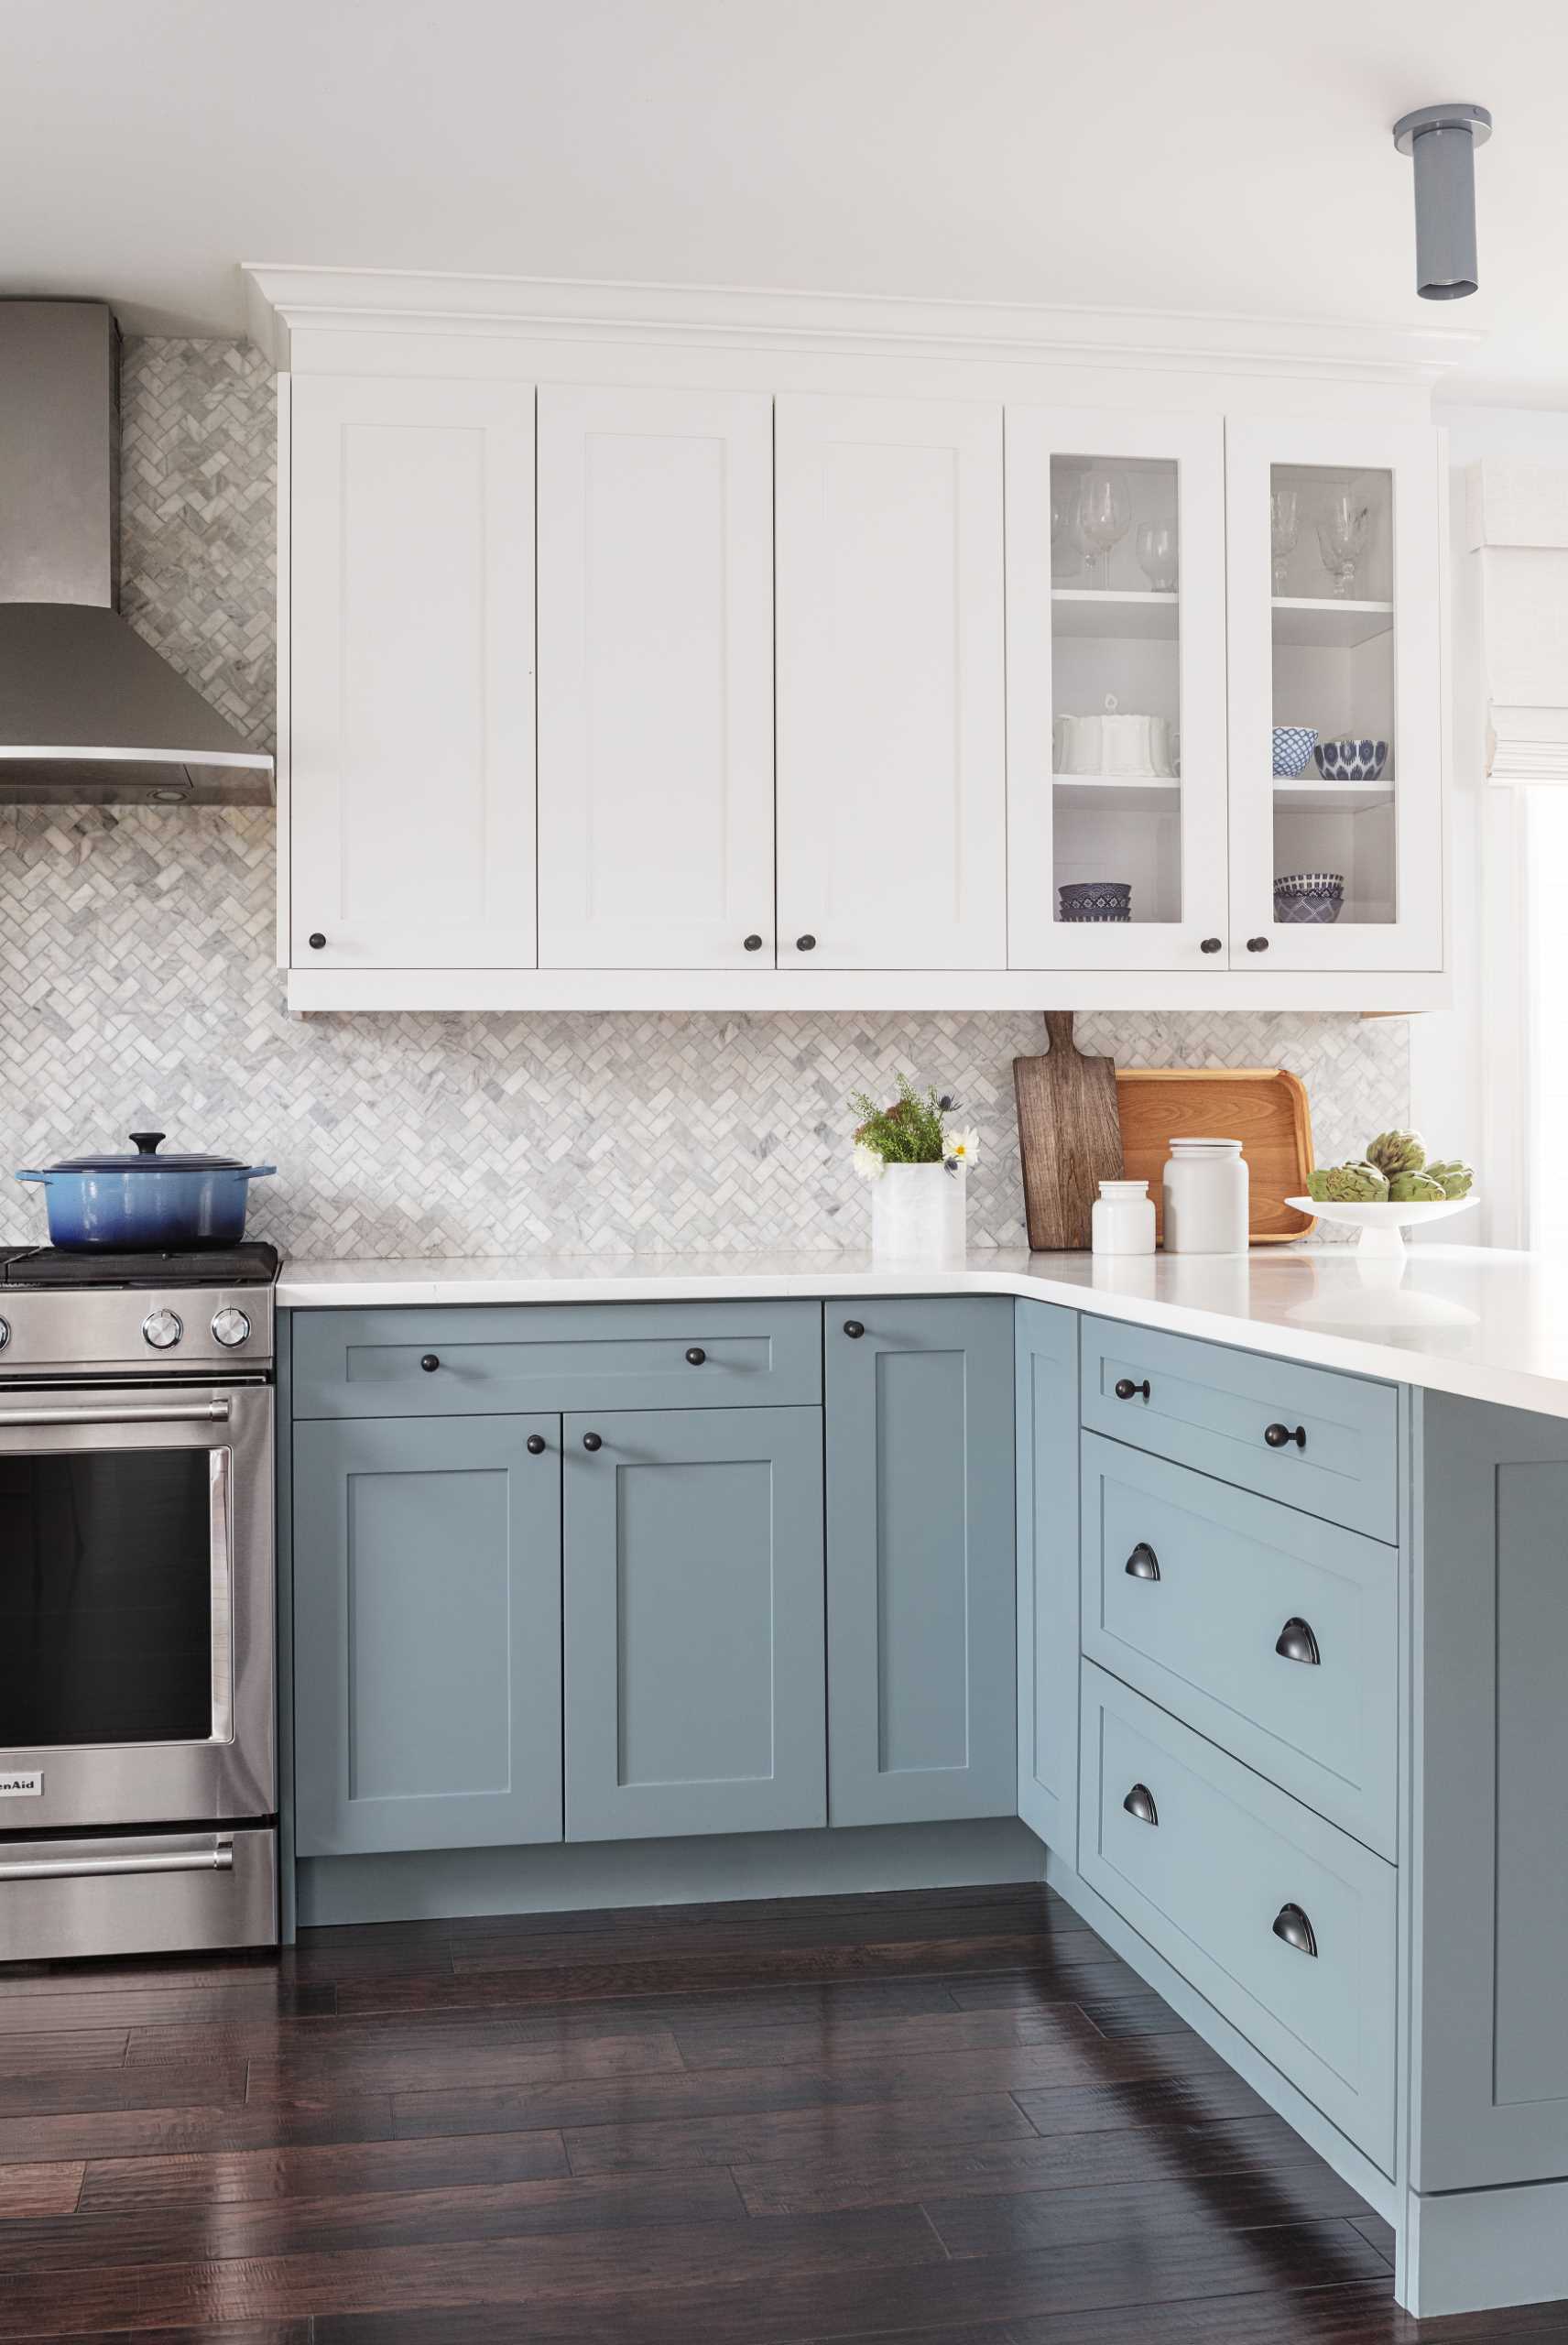 This contemporary kitchen features lower blue cabinets and tile laid in a herringbone pattern acts as a backsplash.